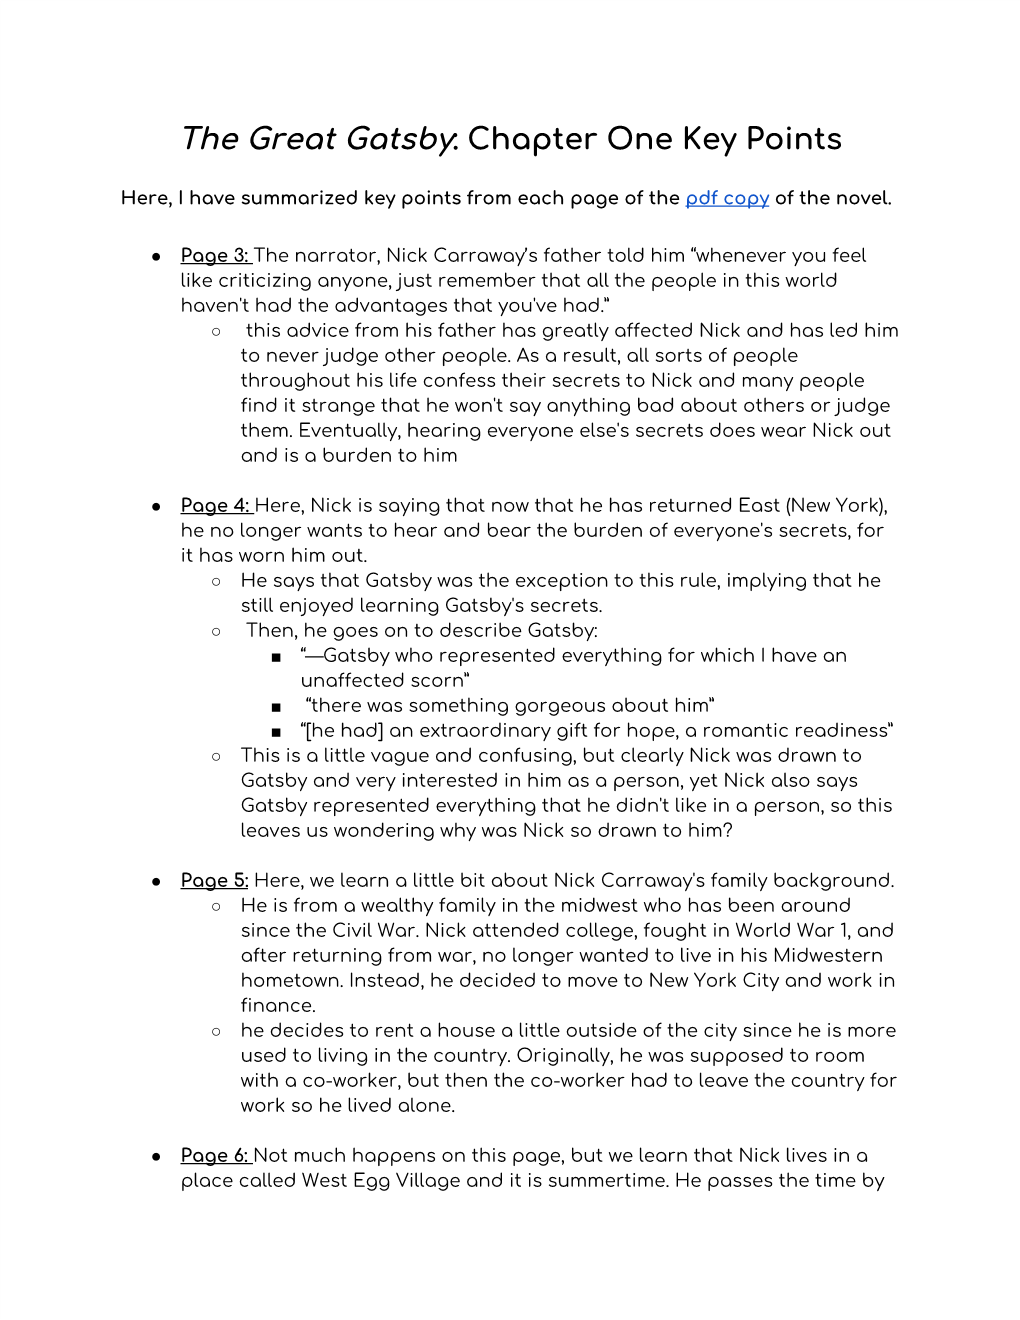 The Great Gatsby​: Chapter One Key Points